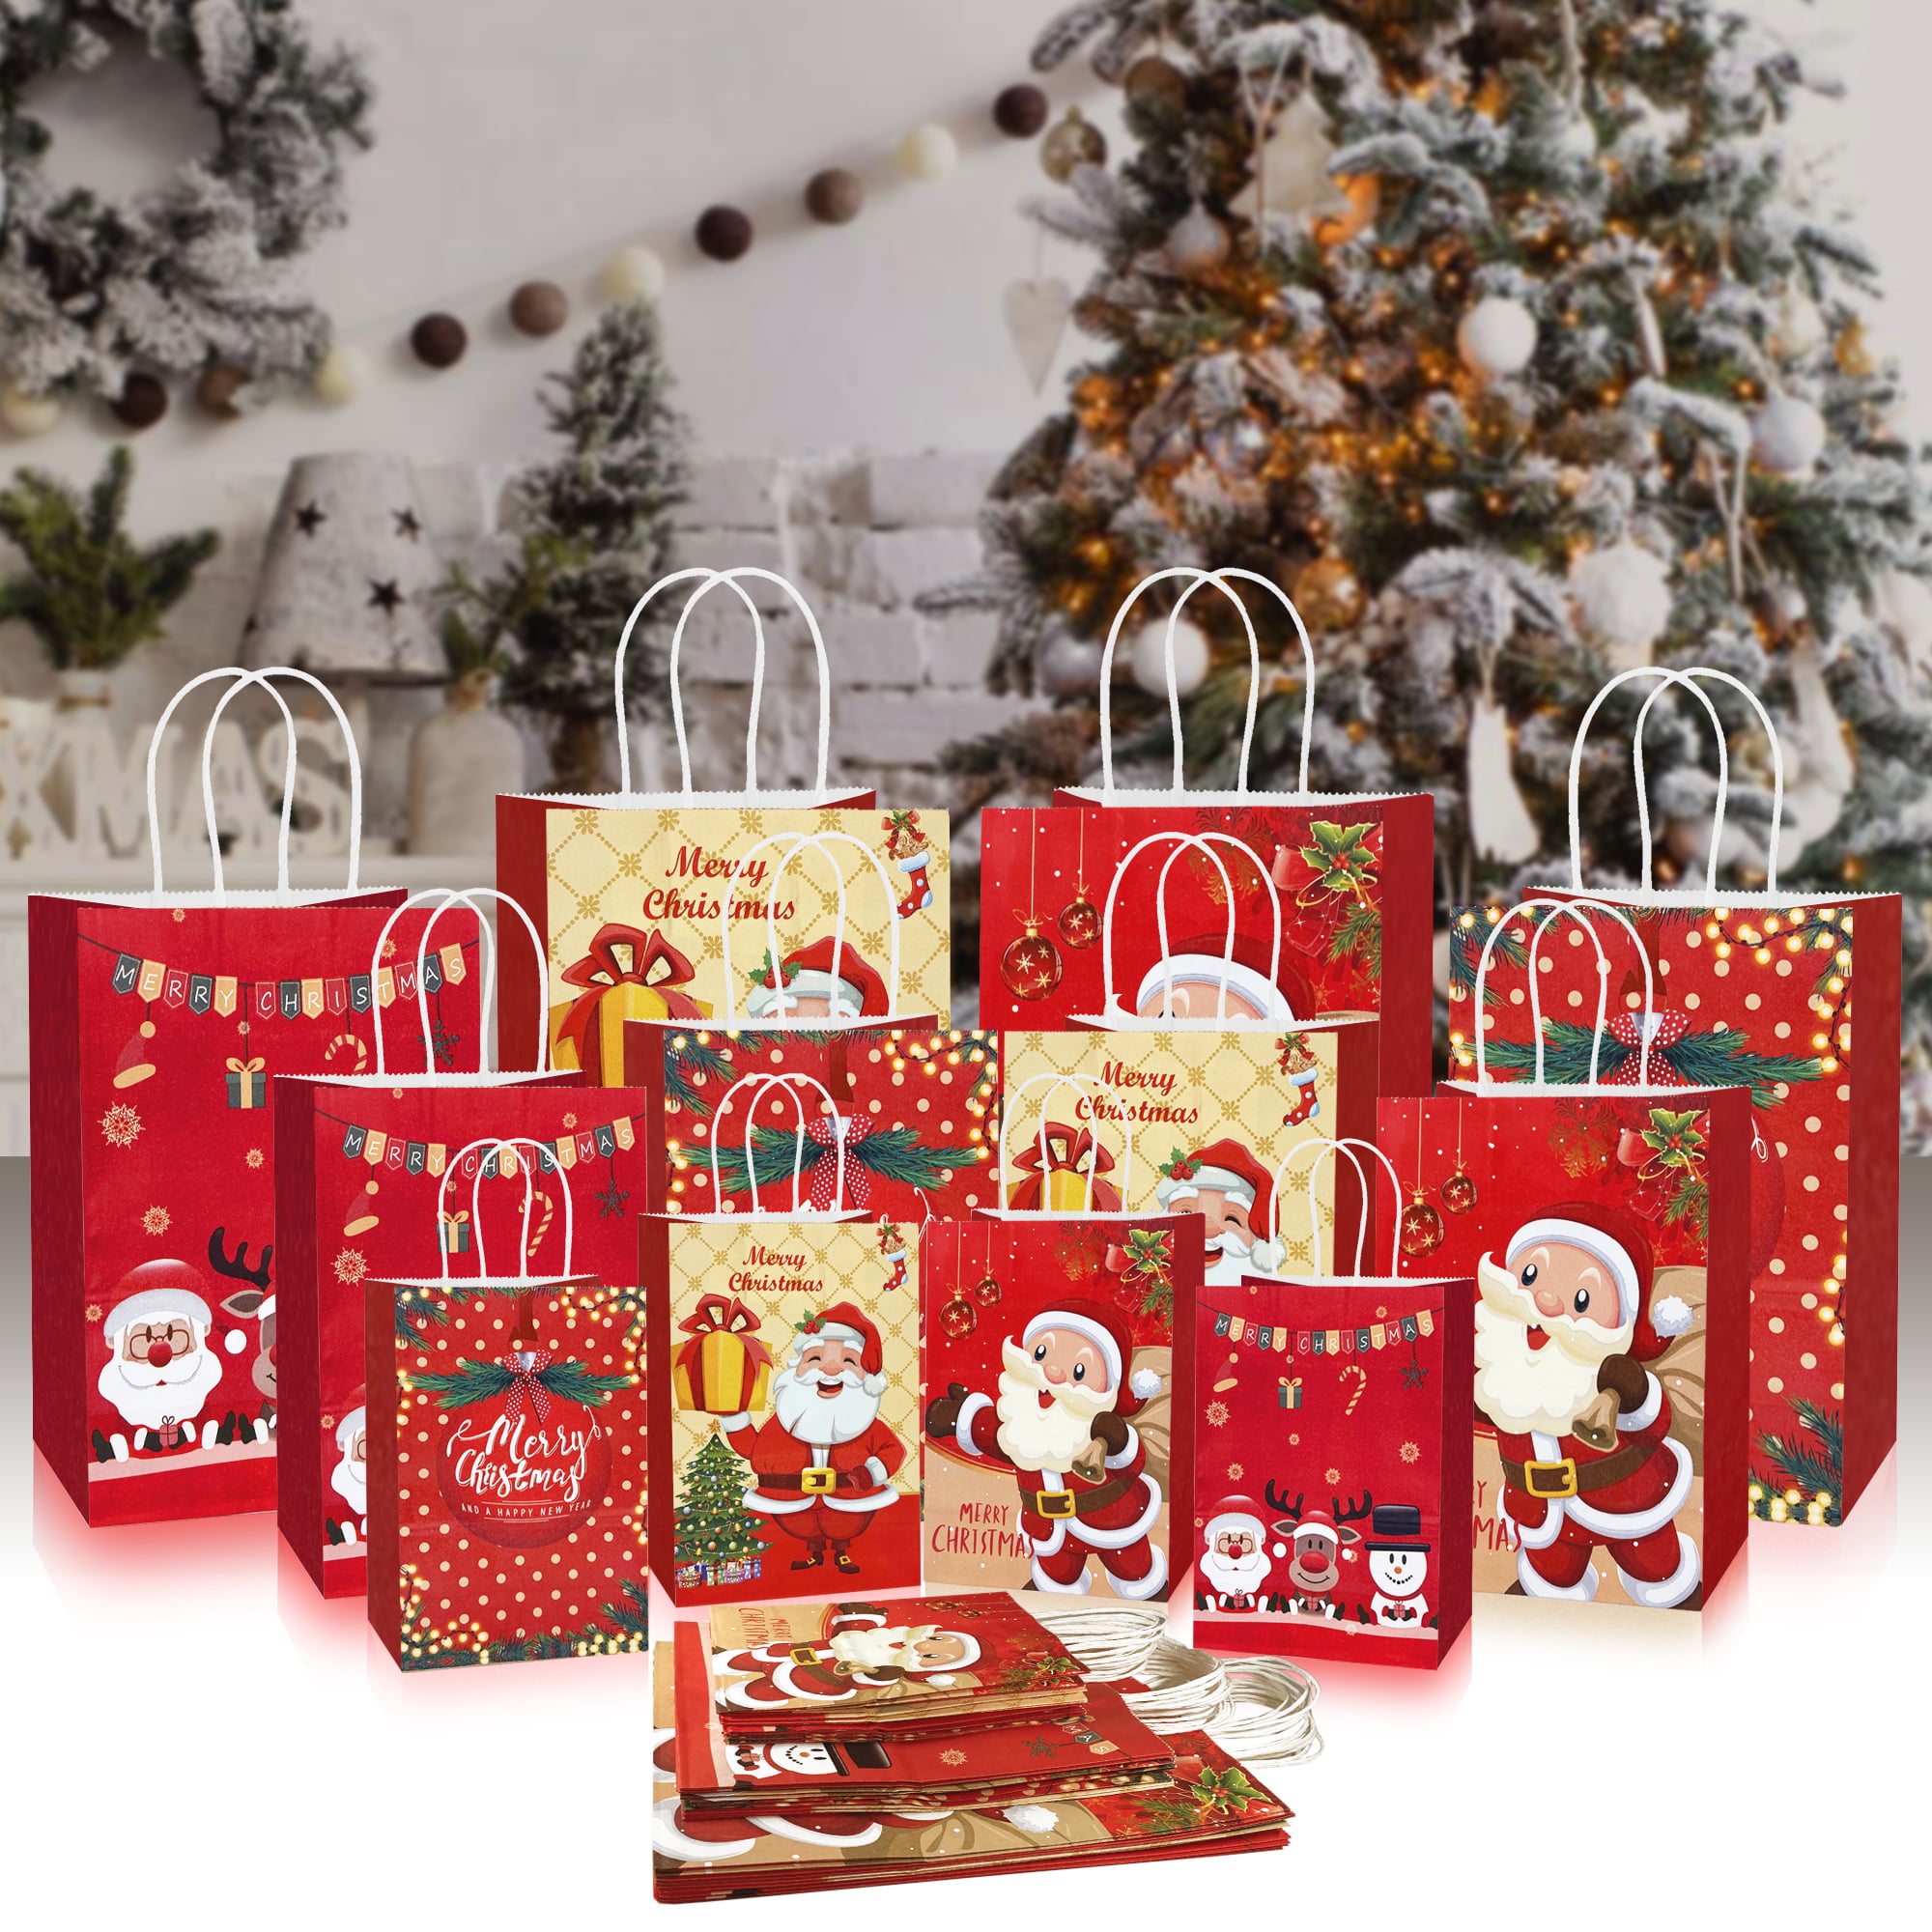 Qty 1 New Christmas House Giant Gift Presents Bag w Tag 36" x 44" ~ Ornaments 